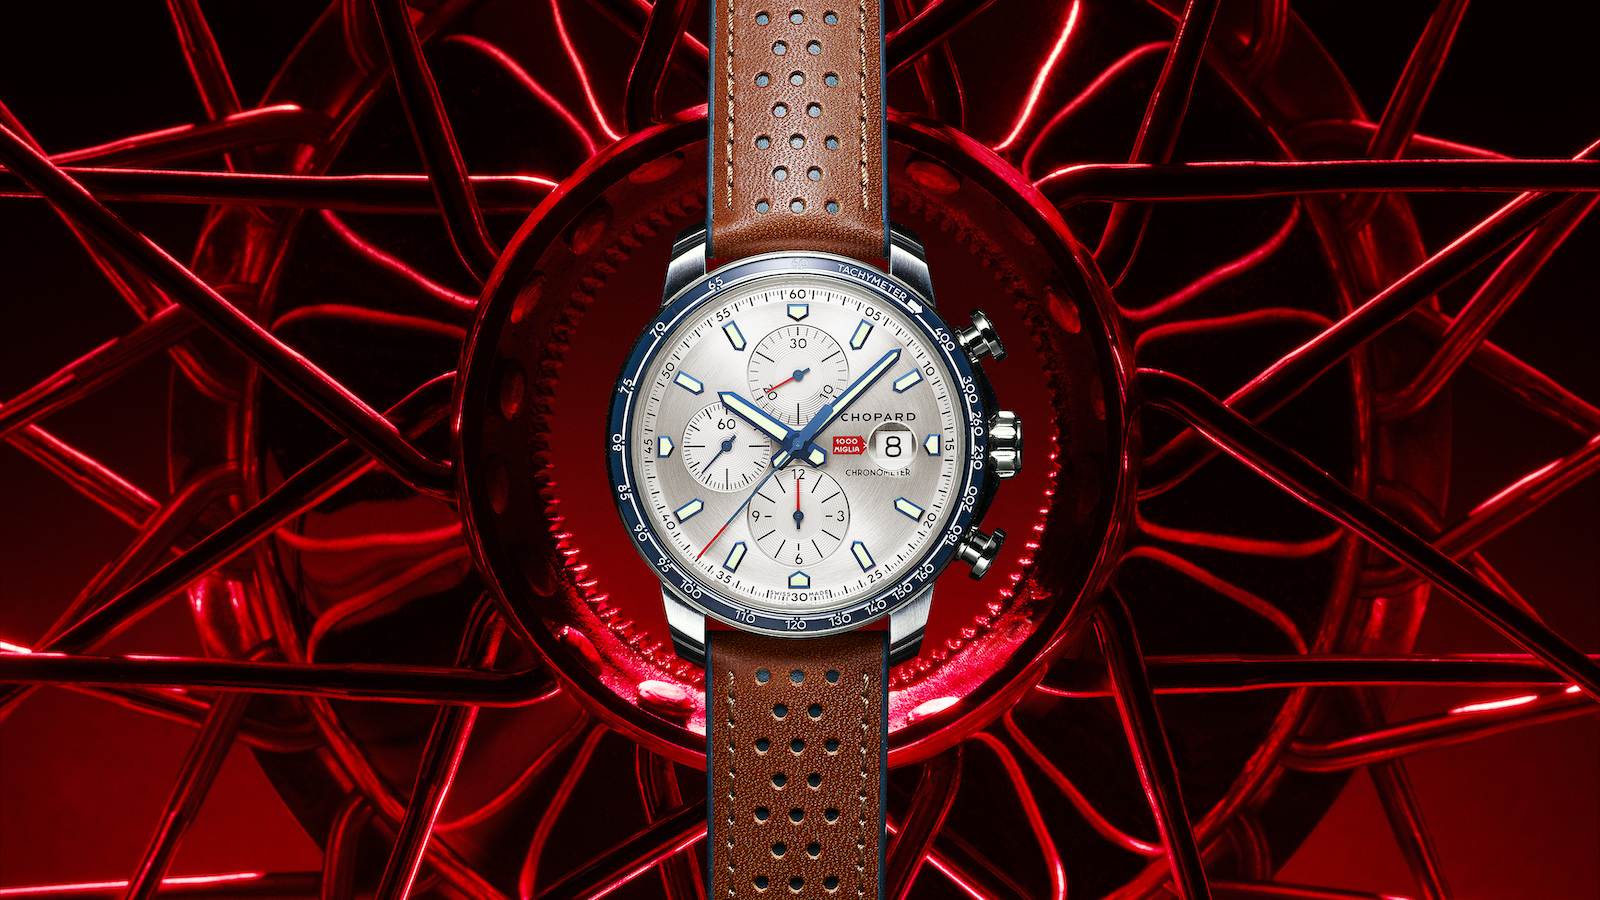 Chopard’s Latest Mille Miglia Watch Is Co-Signed By A Racing Legend